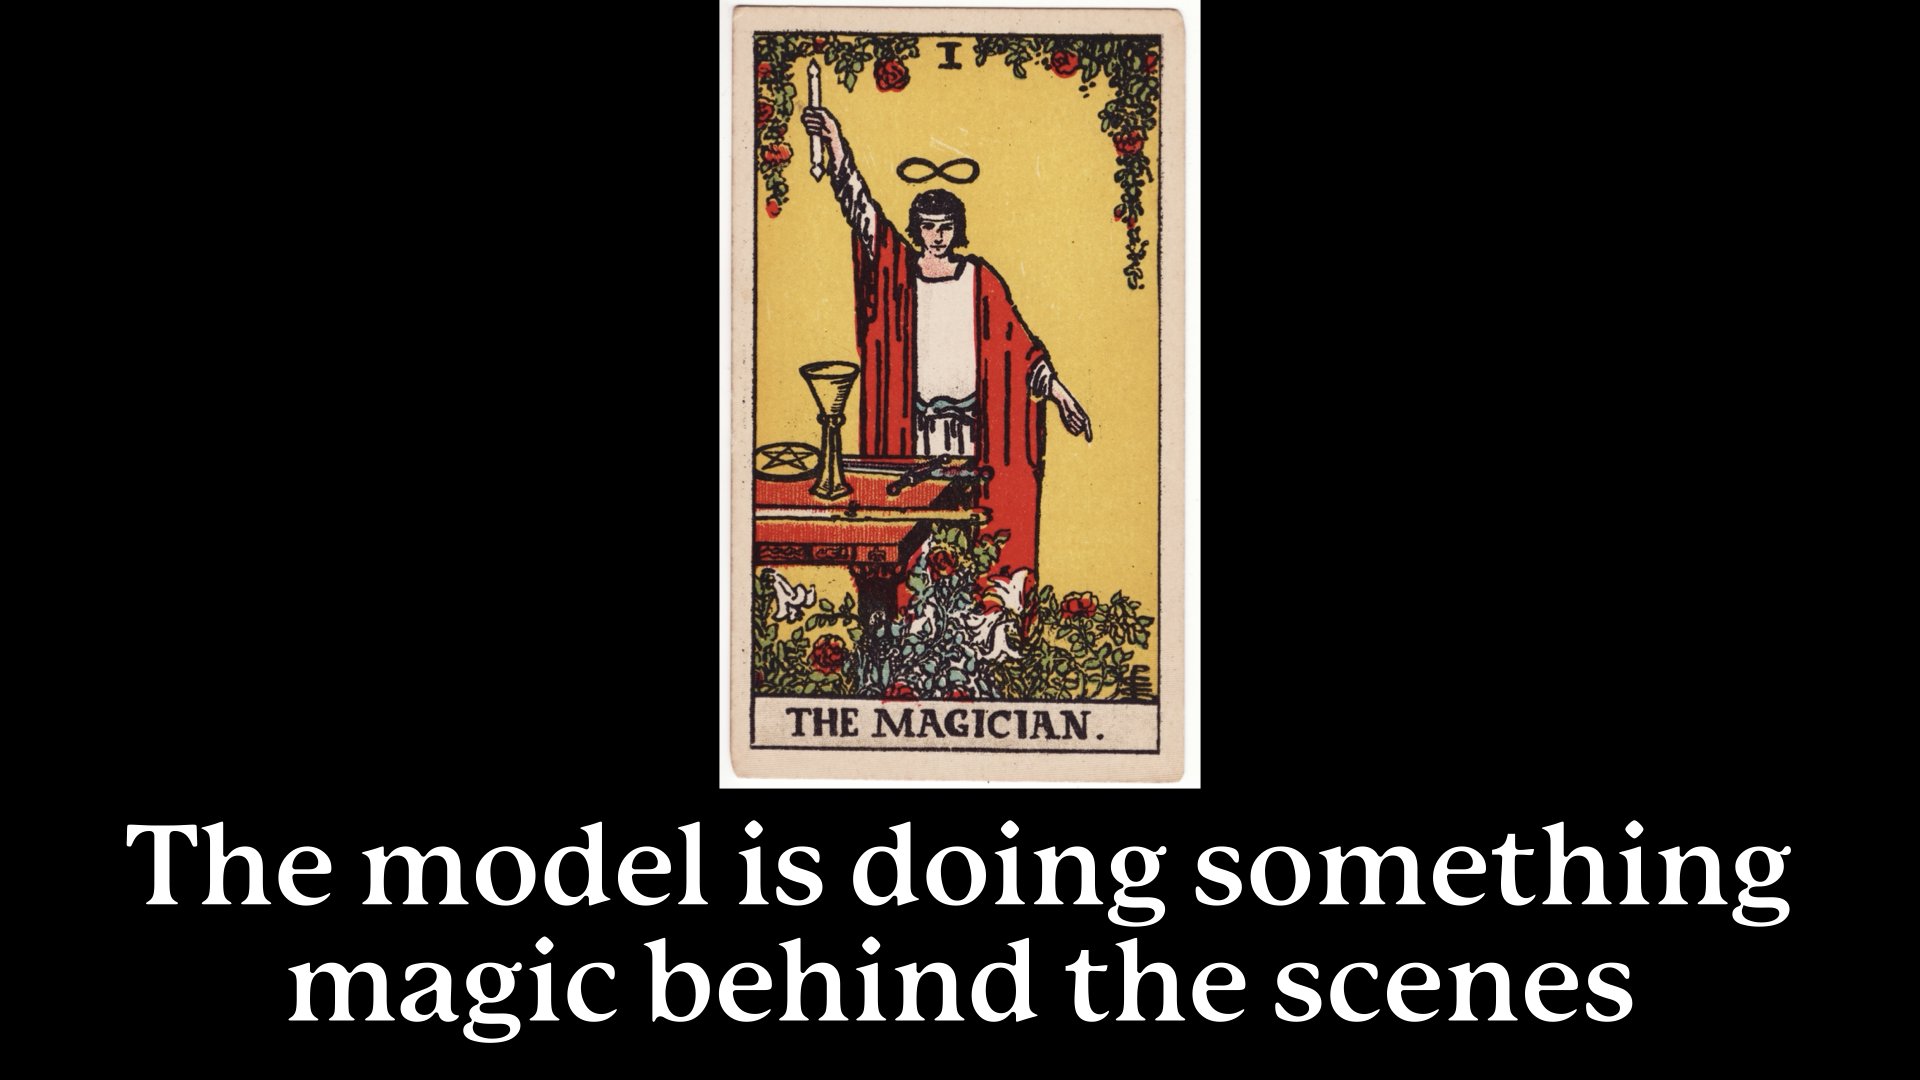 The tarot card The Magician over the text 'The model is doing something magic behind the scenes'.